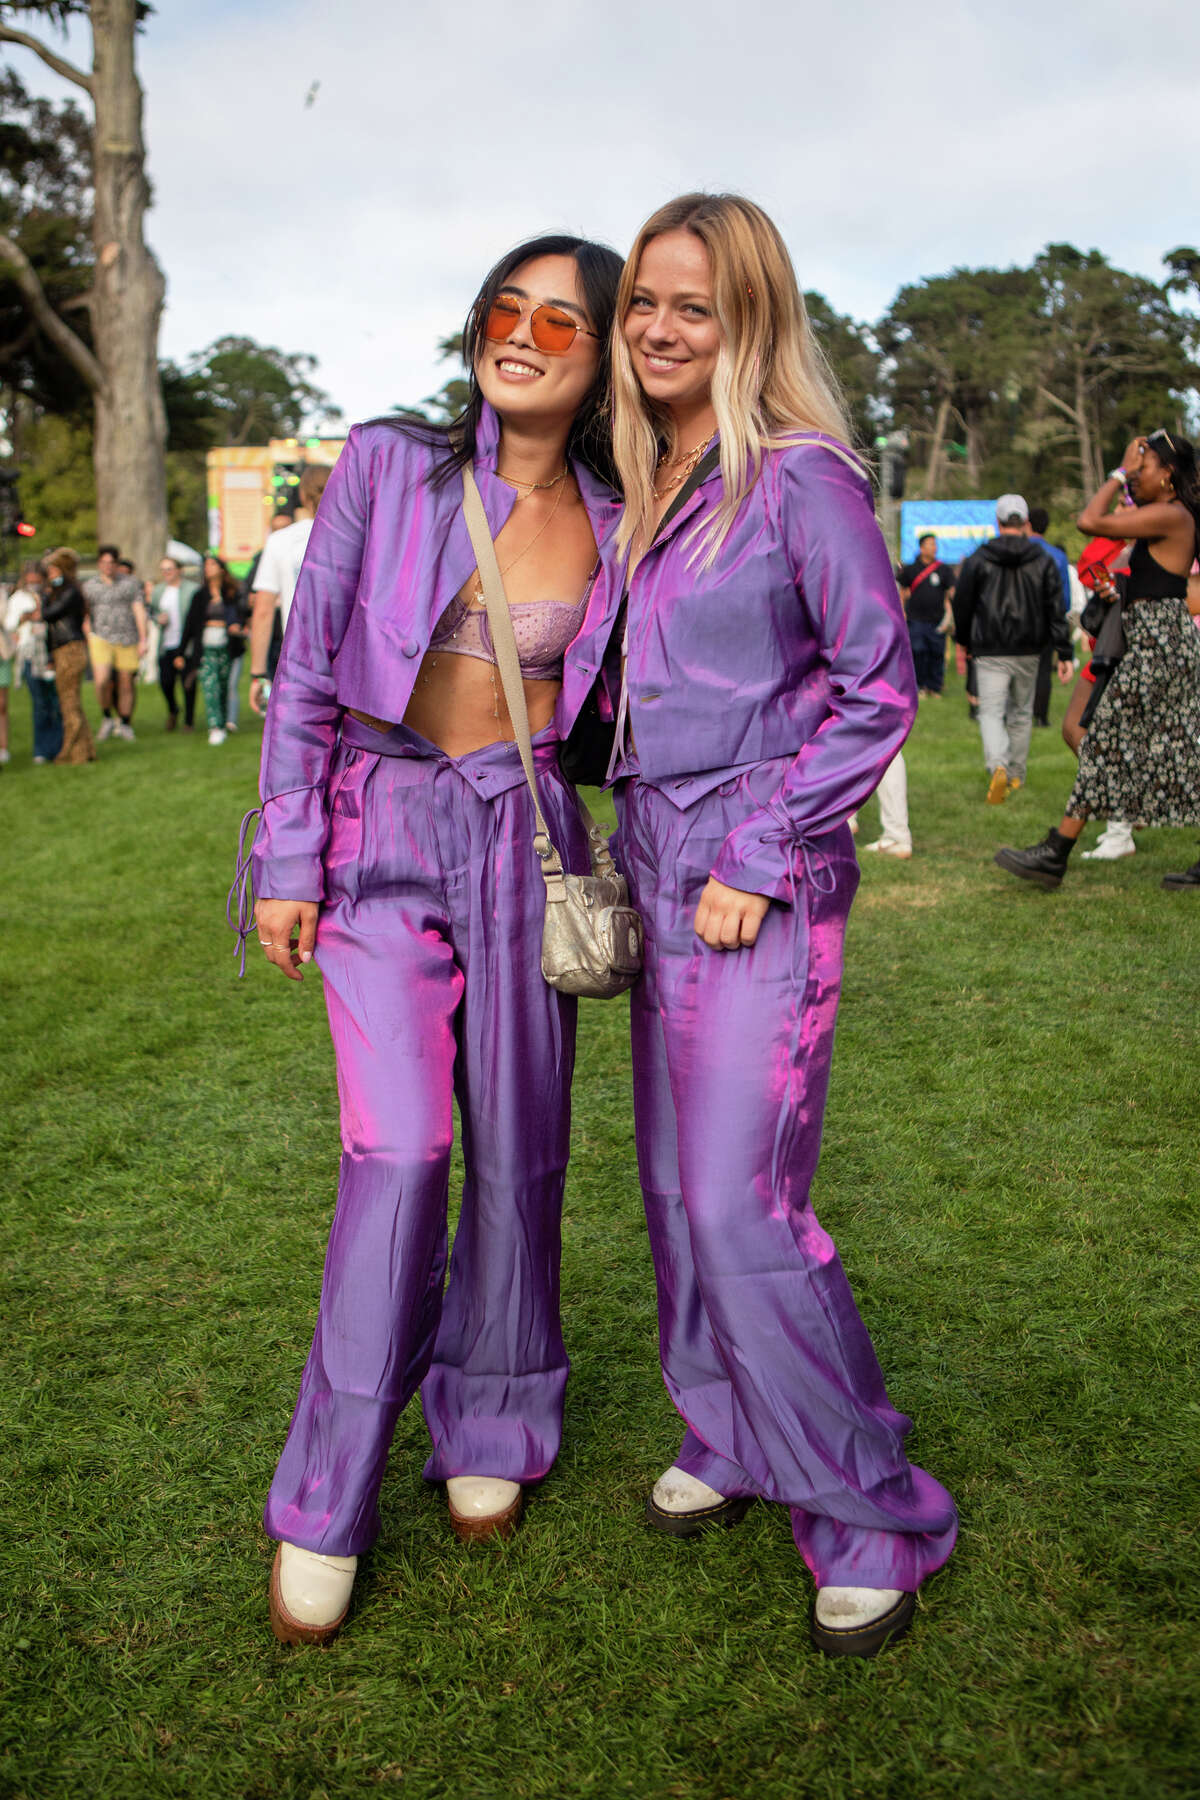 (Left to right) Vivian Feng and Natalie Williams we are complementary costumes at Outside Lands in Golden Gate Park in San Francisco, Calif. on Aug. 5, 2022.